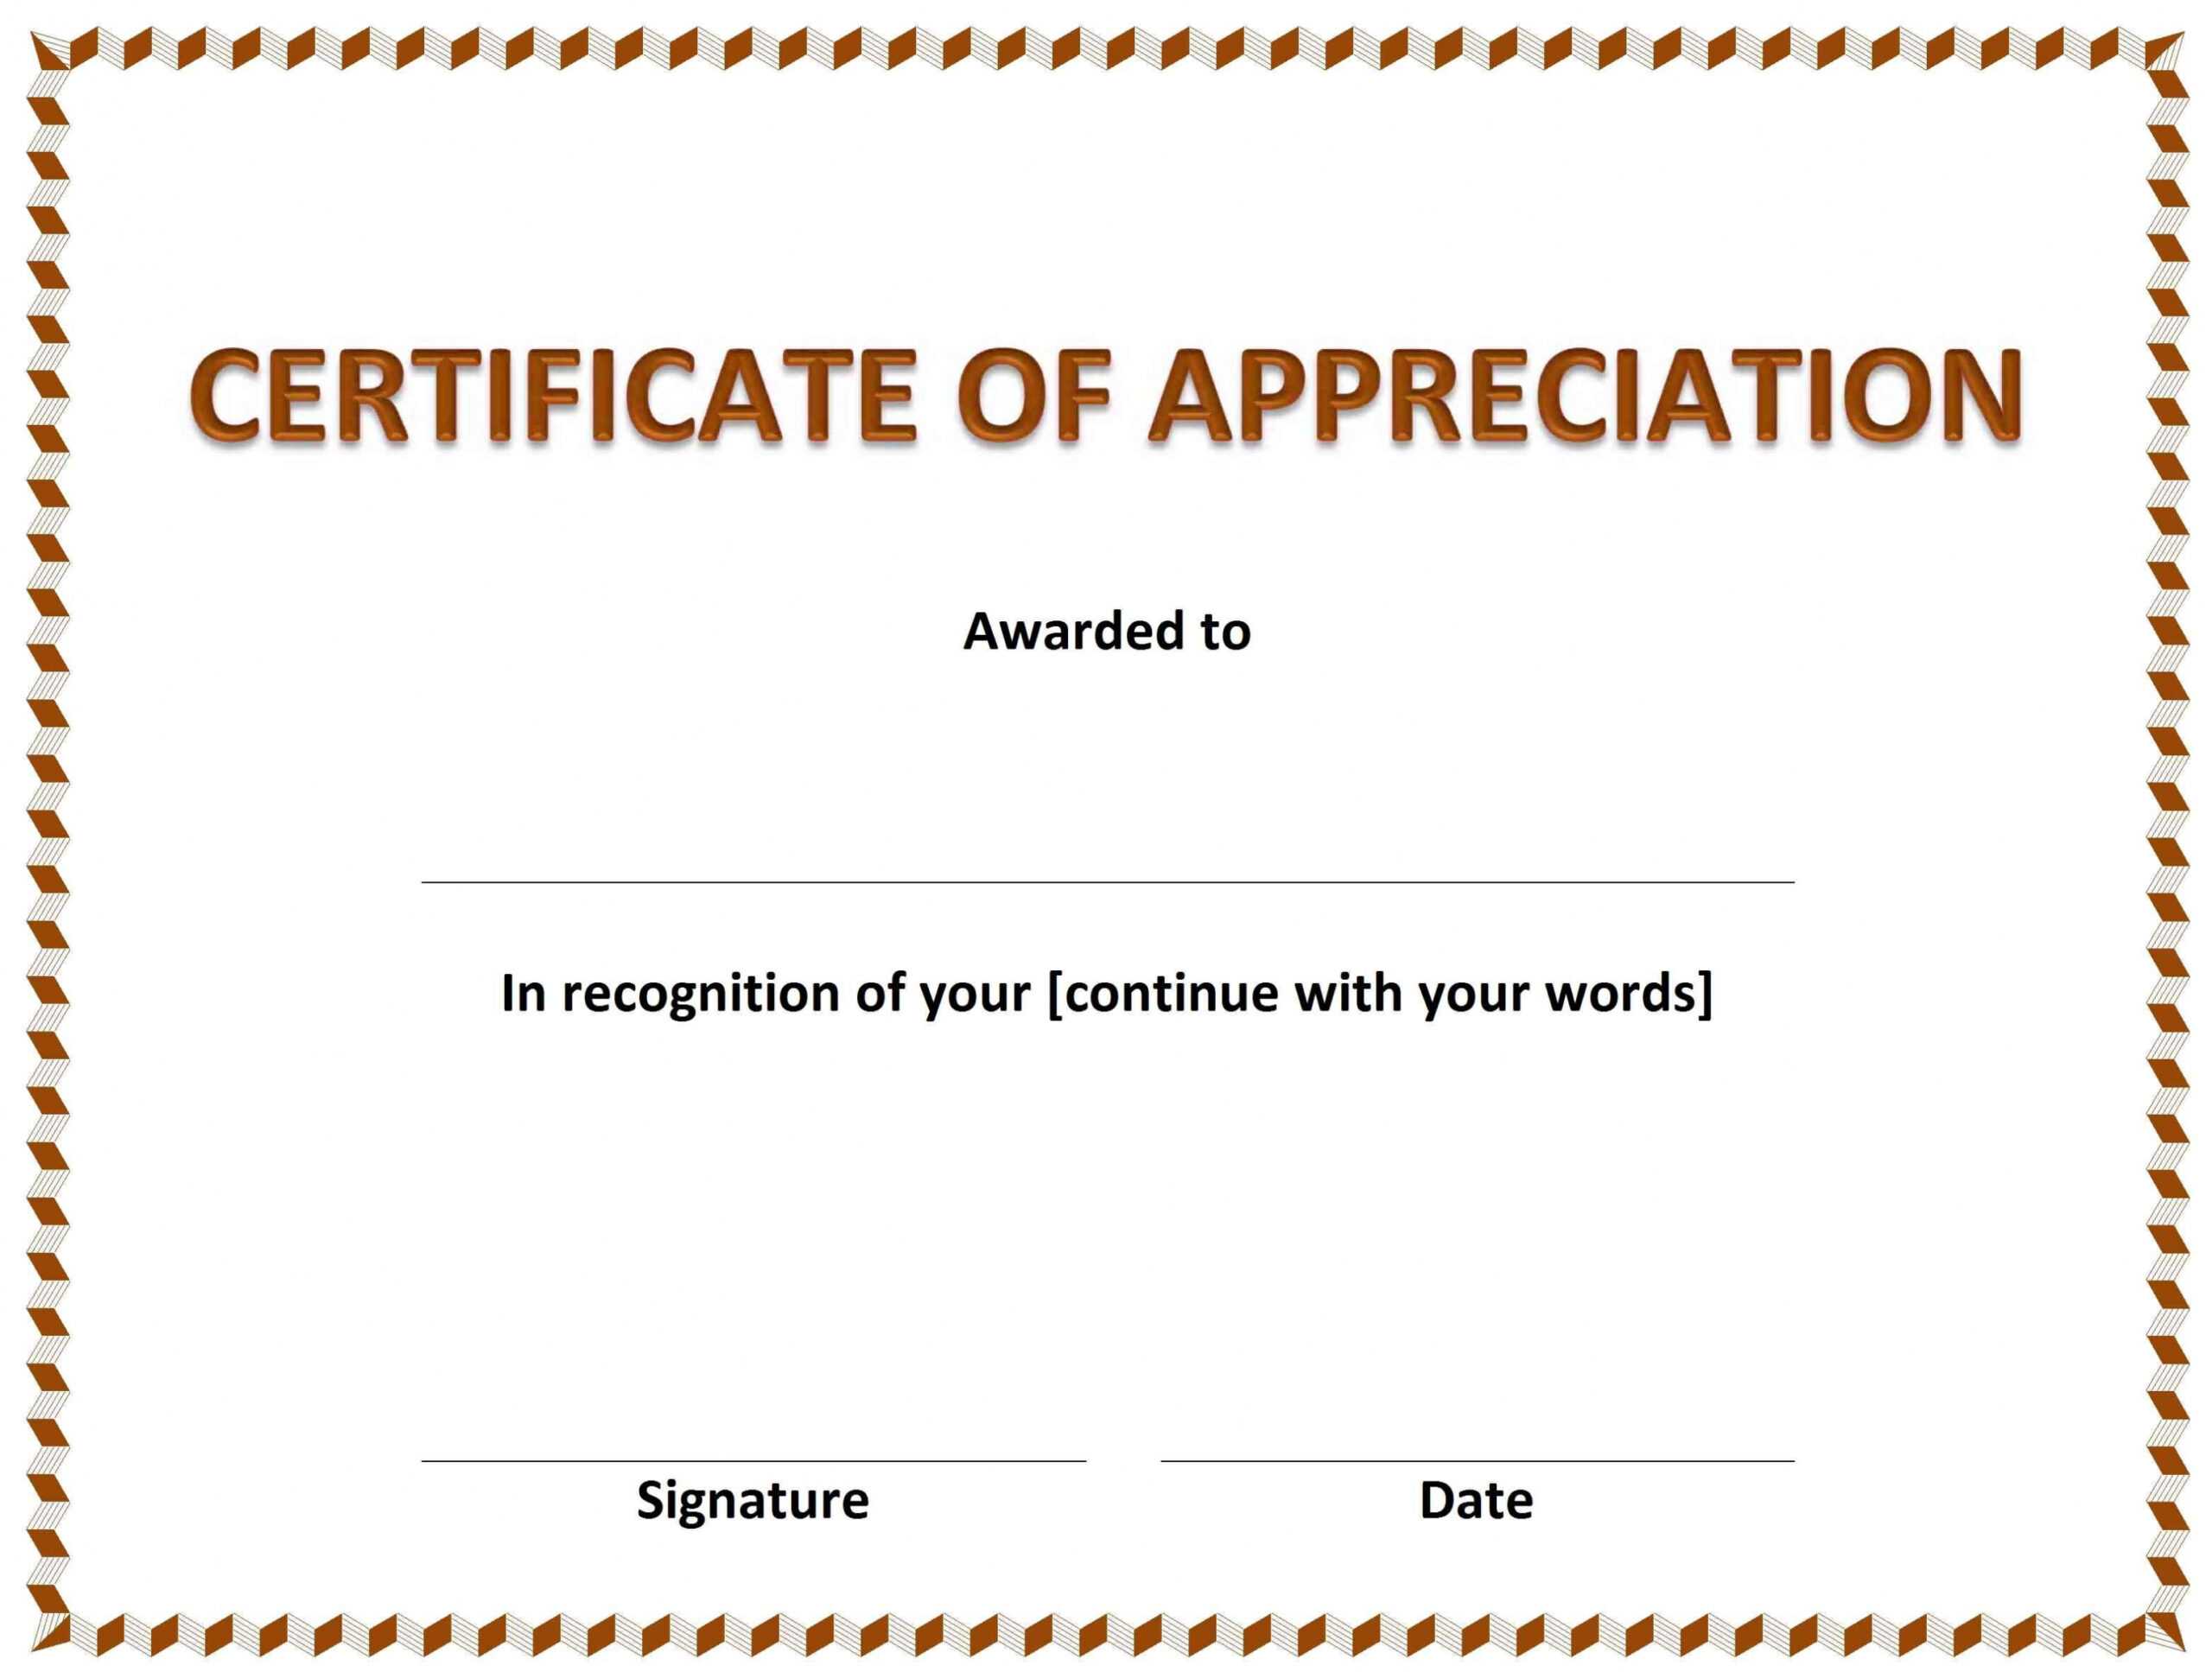 Certificate Of Appreciation » Officetemplates intended for Certificate Of Attainment Template